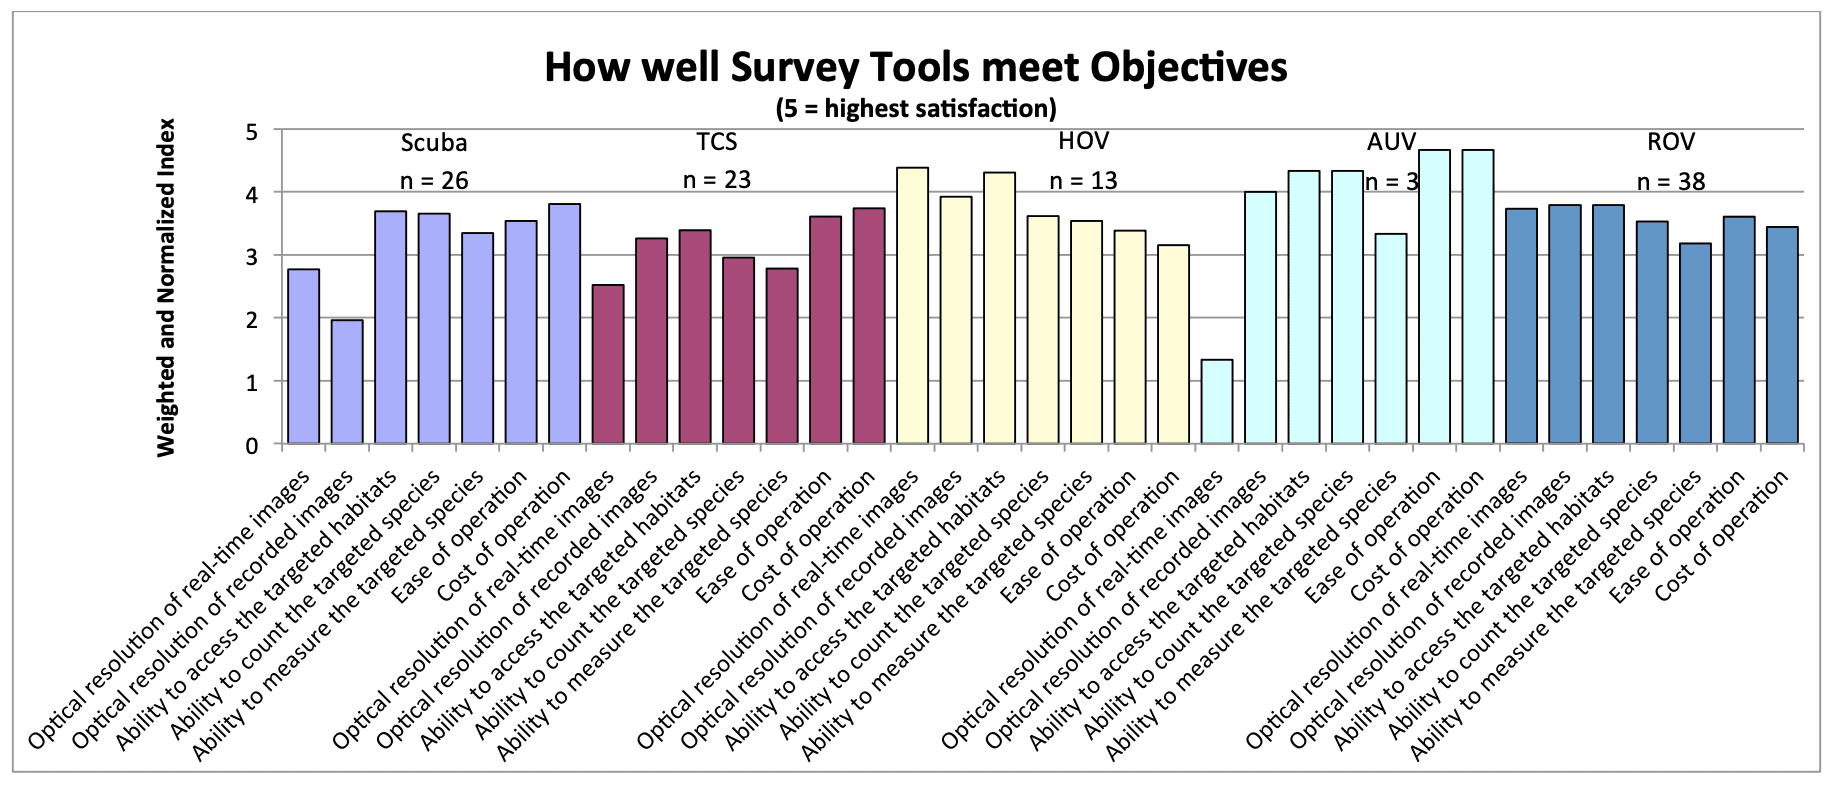 June 2015 - A COMPARATIVE ASSESSMENT OF UNDERWATER VISUAL SURVEY TOOLS: 103